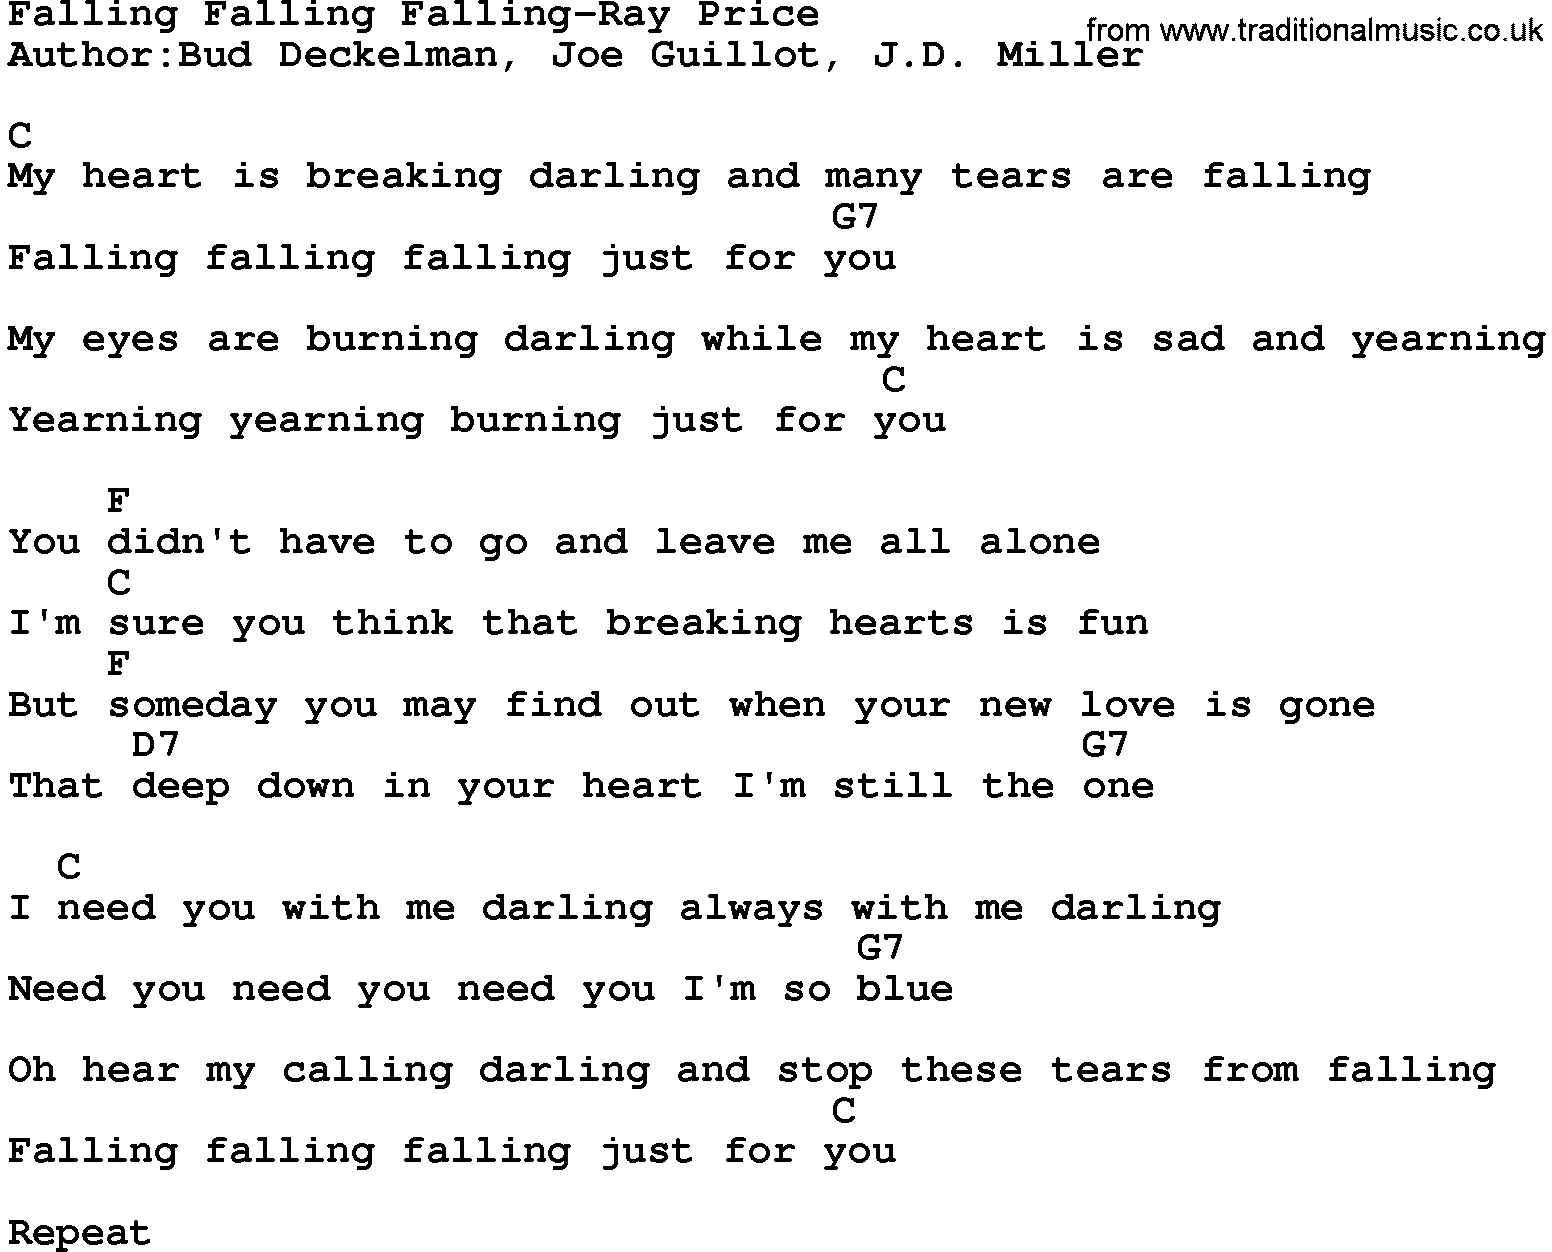 Country music song: Falling Falling Falling-Ray Price lyrics and chords